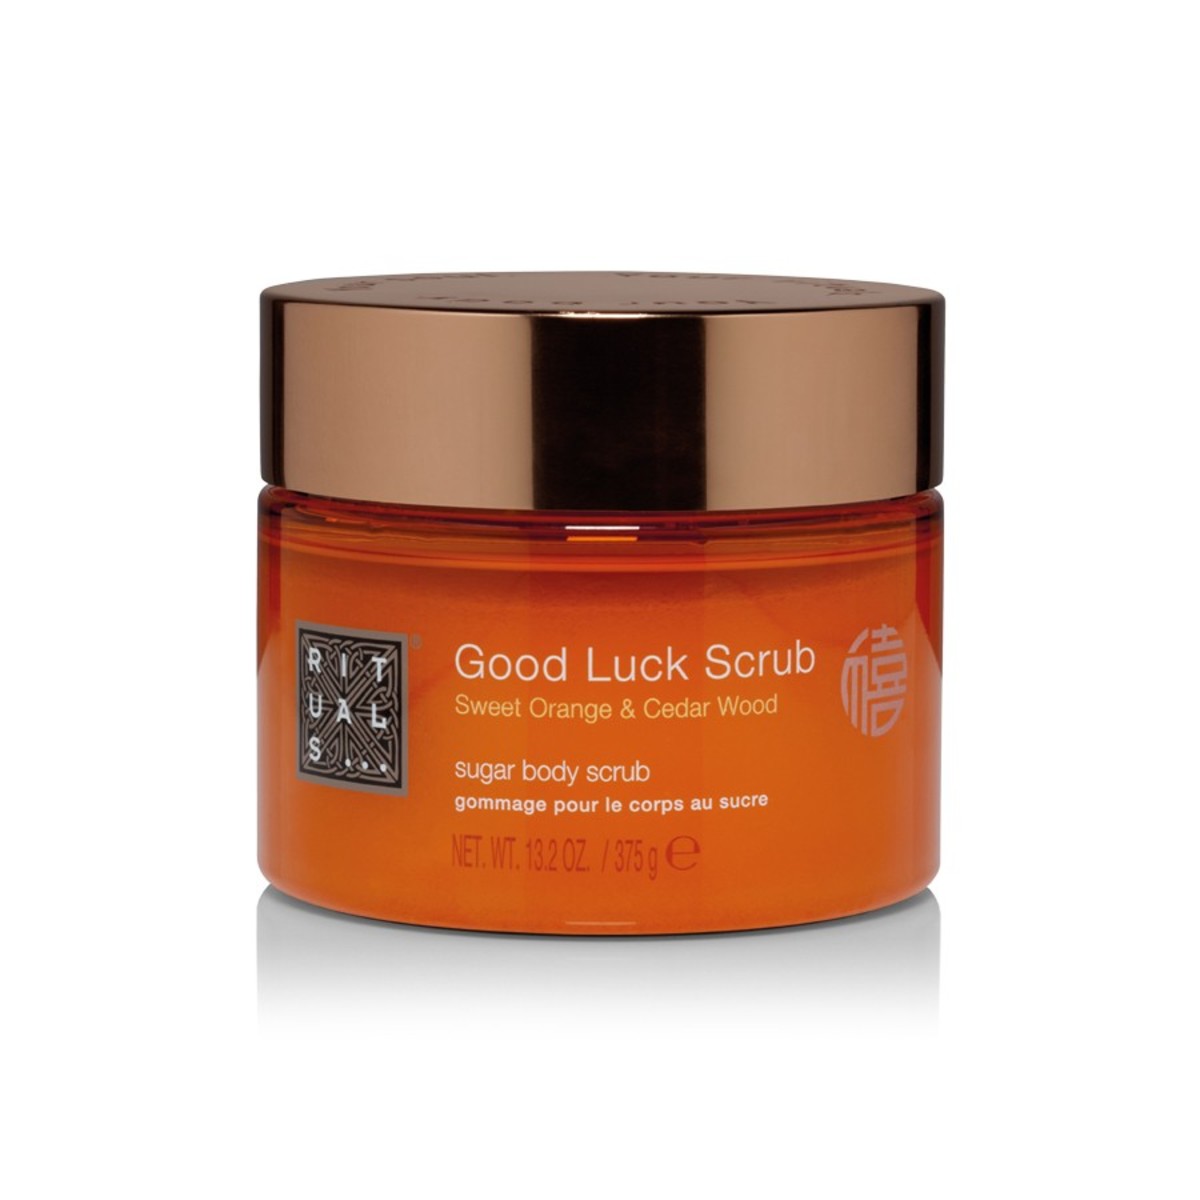 Rituals Good Luck body scrub, $29, available at Rituals.